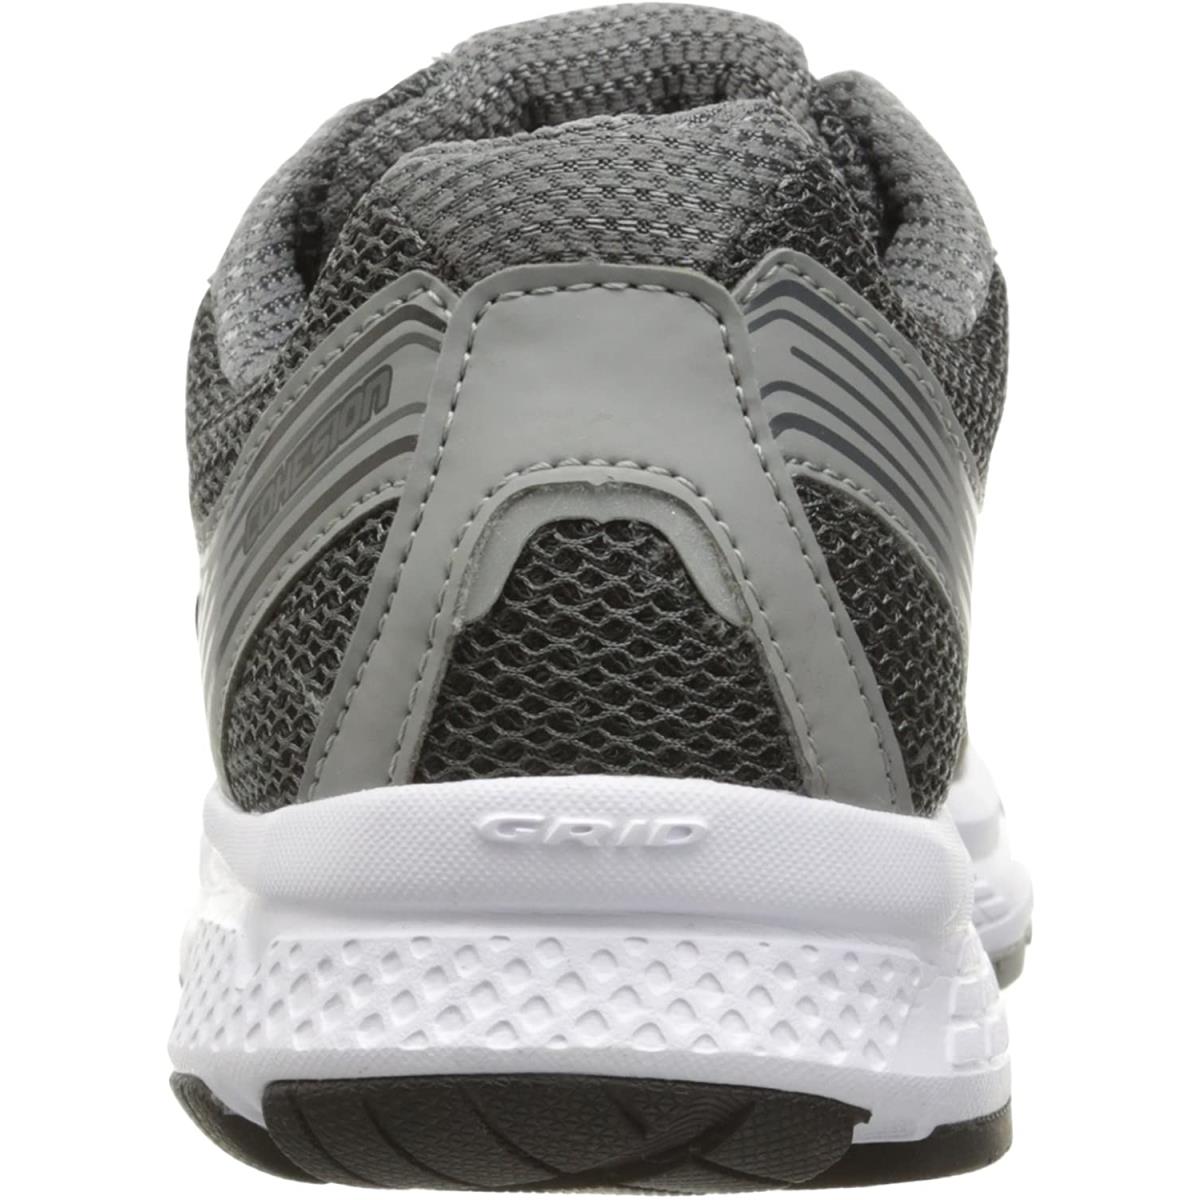 Saucony Men`s Cohesion 10 Running Shoe Grey/Silver